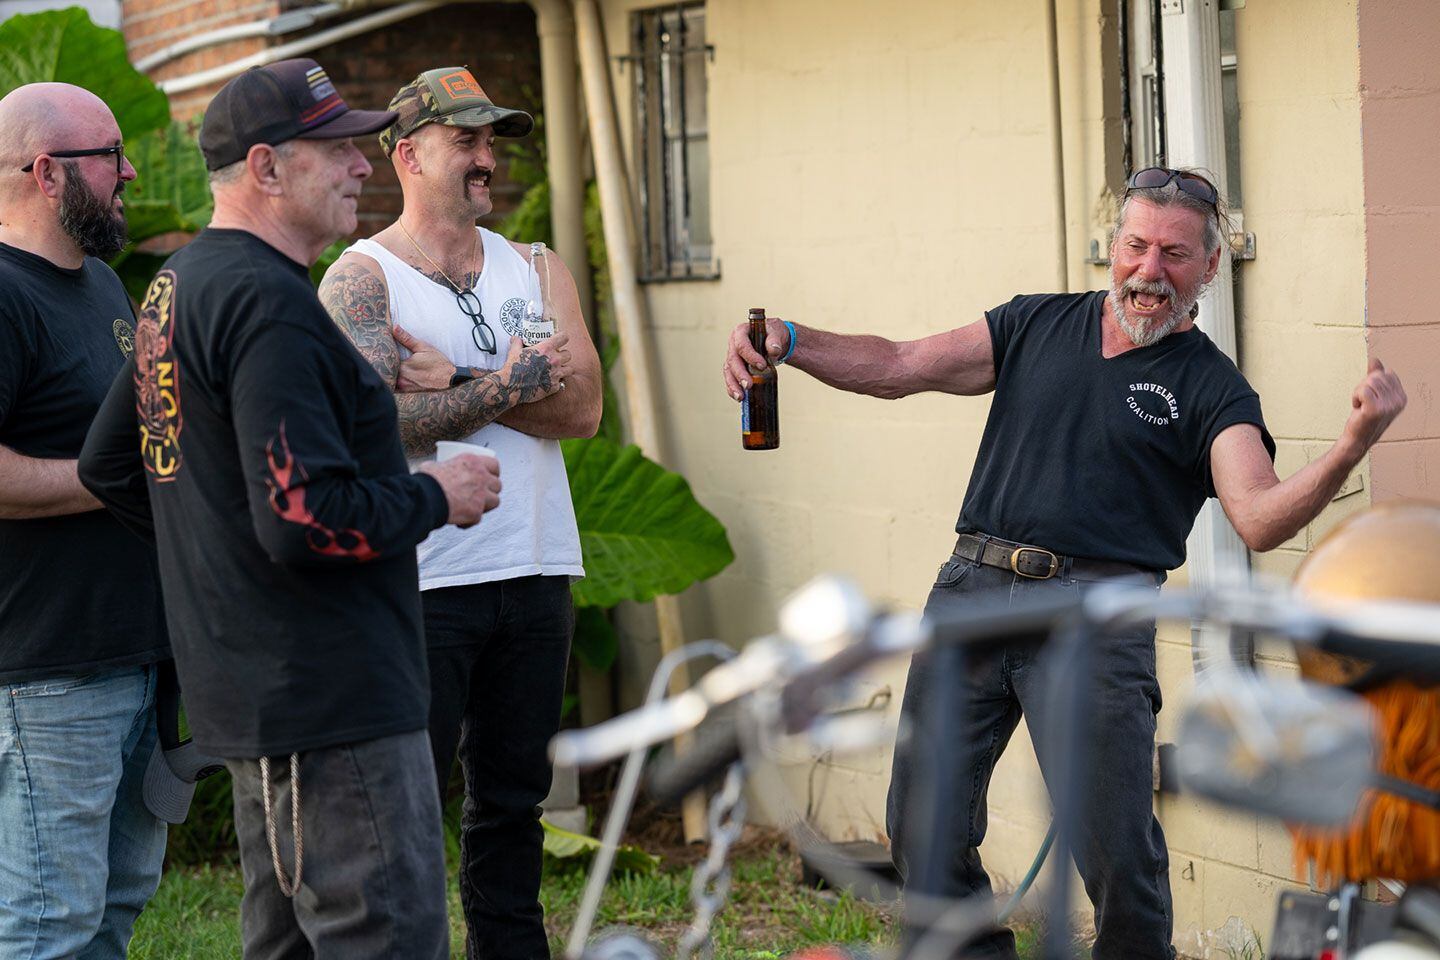 Adventure is nothing without a story. The weekly Shovelhead Coalition bike night at The Other Place brings out the storytelling.